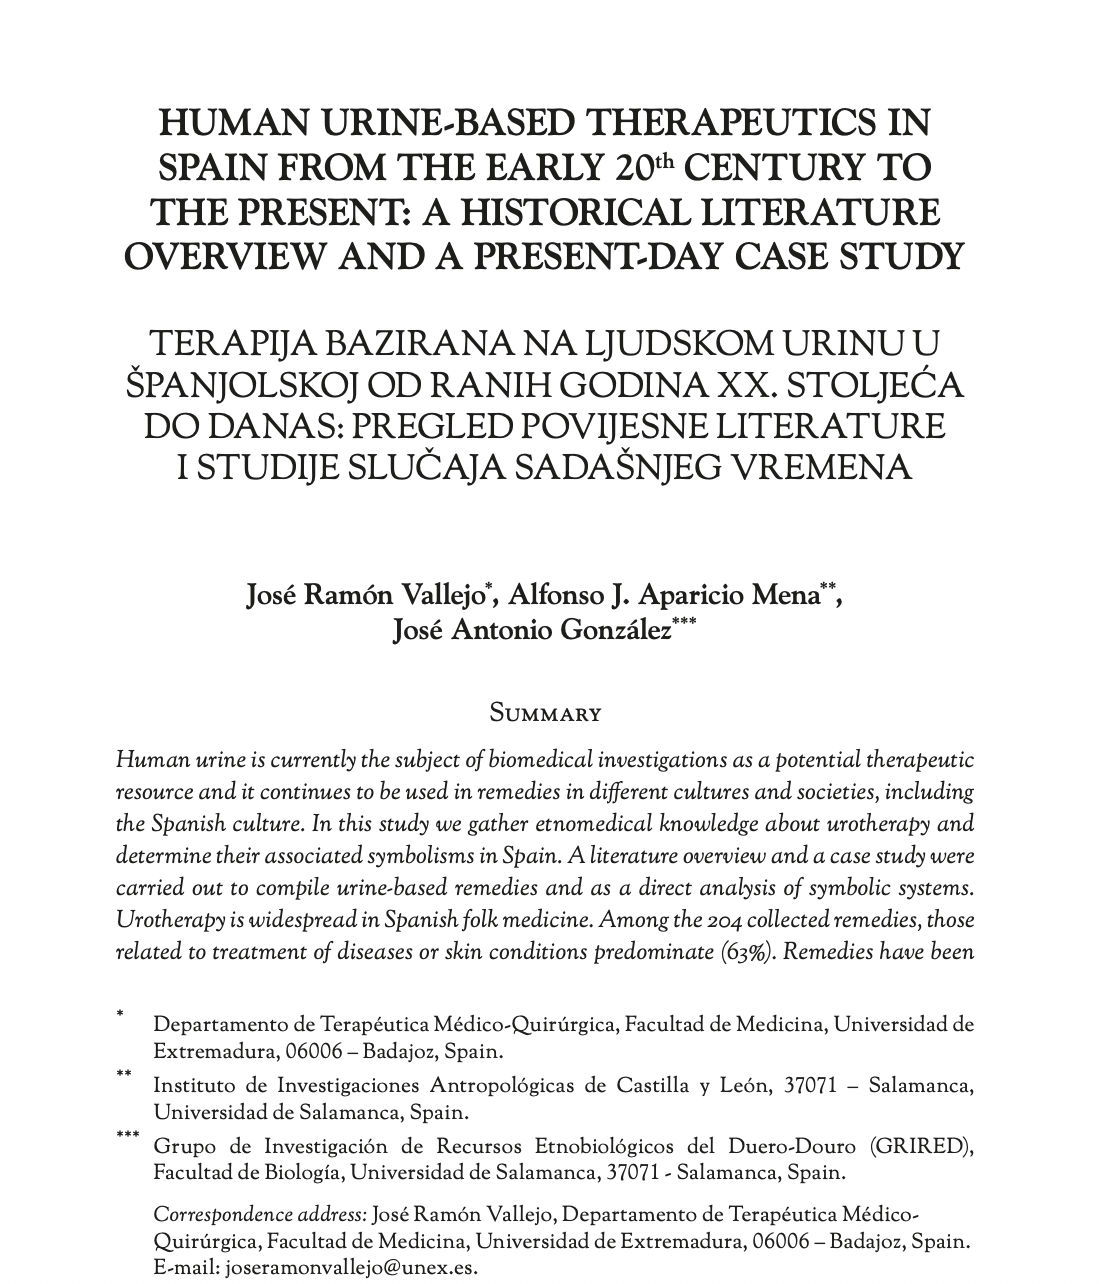 HUMAN URINE-BASED THERAPEUTICS IN SPAIN FROM THE EARLY 20th CENTURY TO THE PRESENT: A HISTORICAL LITERATURE OVERVIEW AND A PRESENT-DAY CASE STUDY